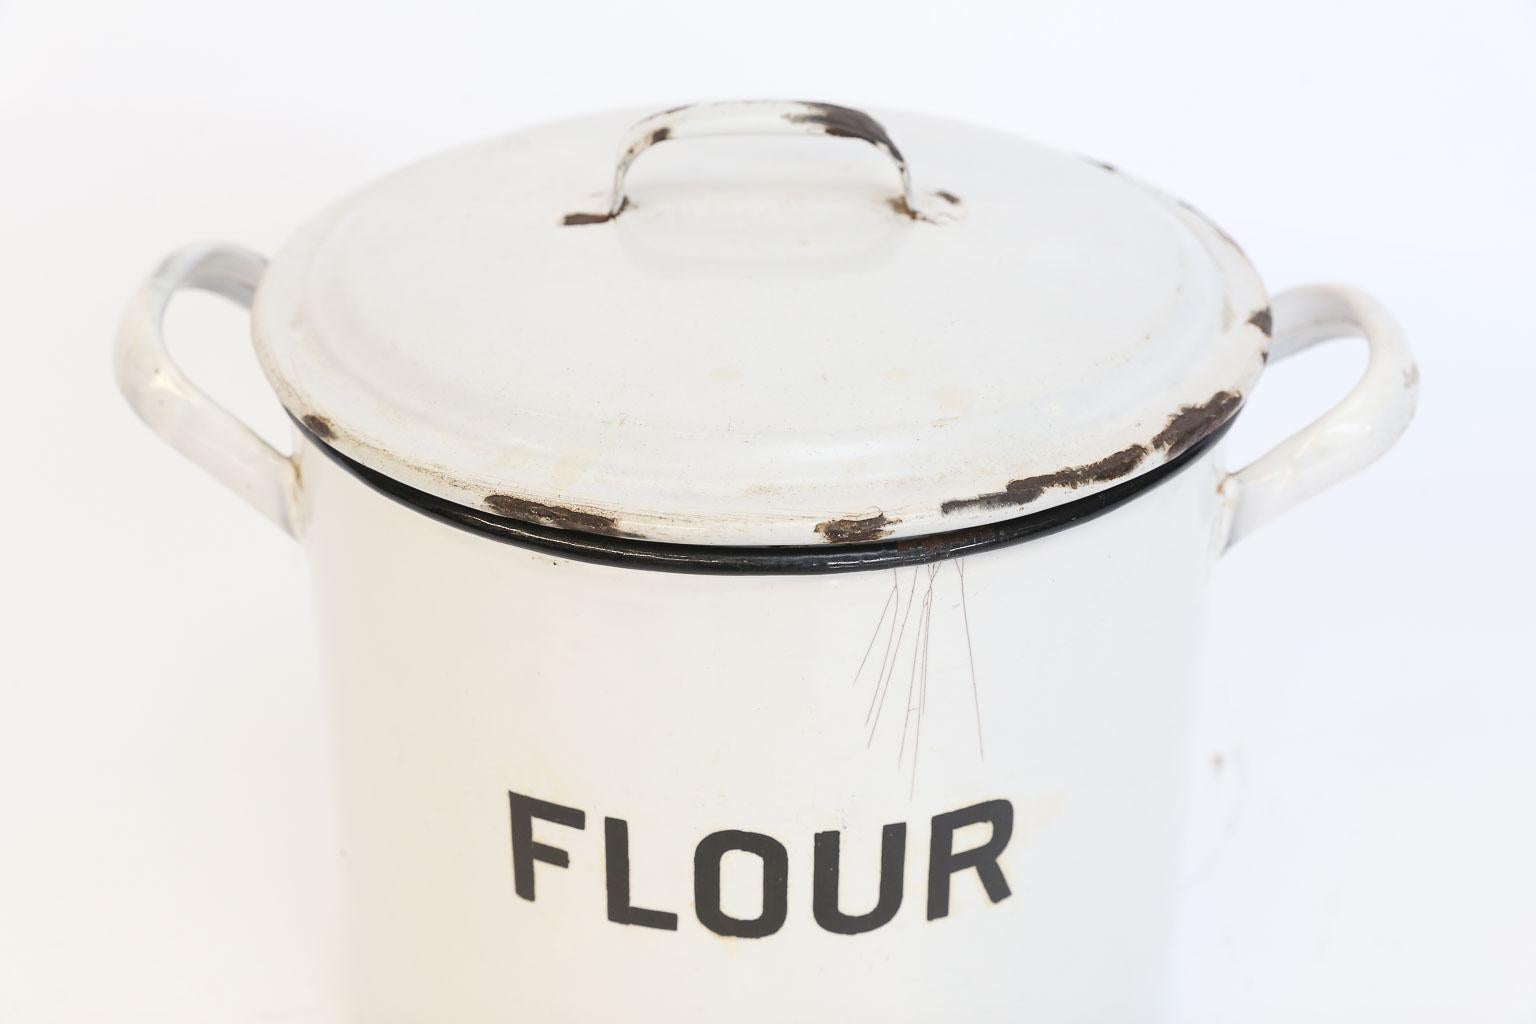 Found in England, this is an enamel flour bin with lid. Once used to store flour, this piece will now add English charm to your kitchen. The white enamel is accented with black lettering.